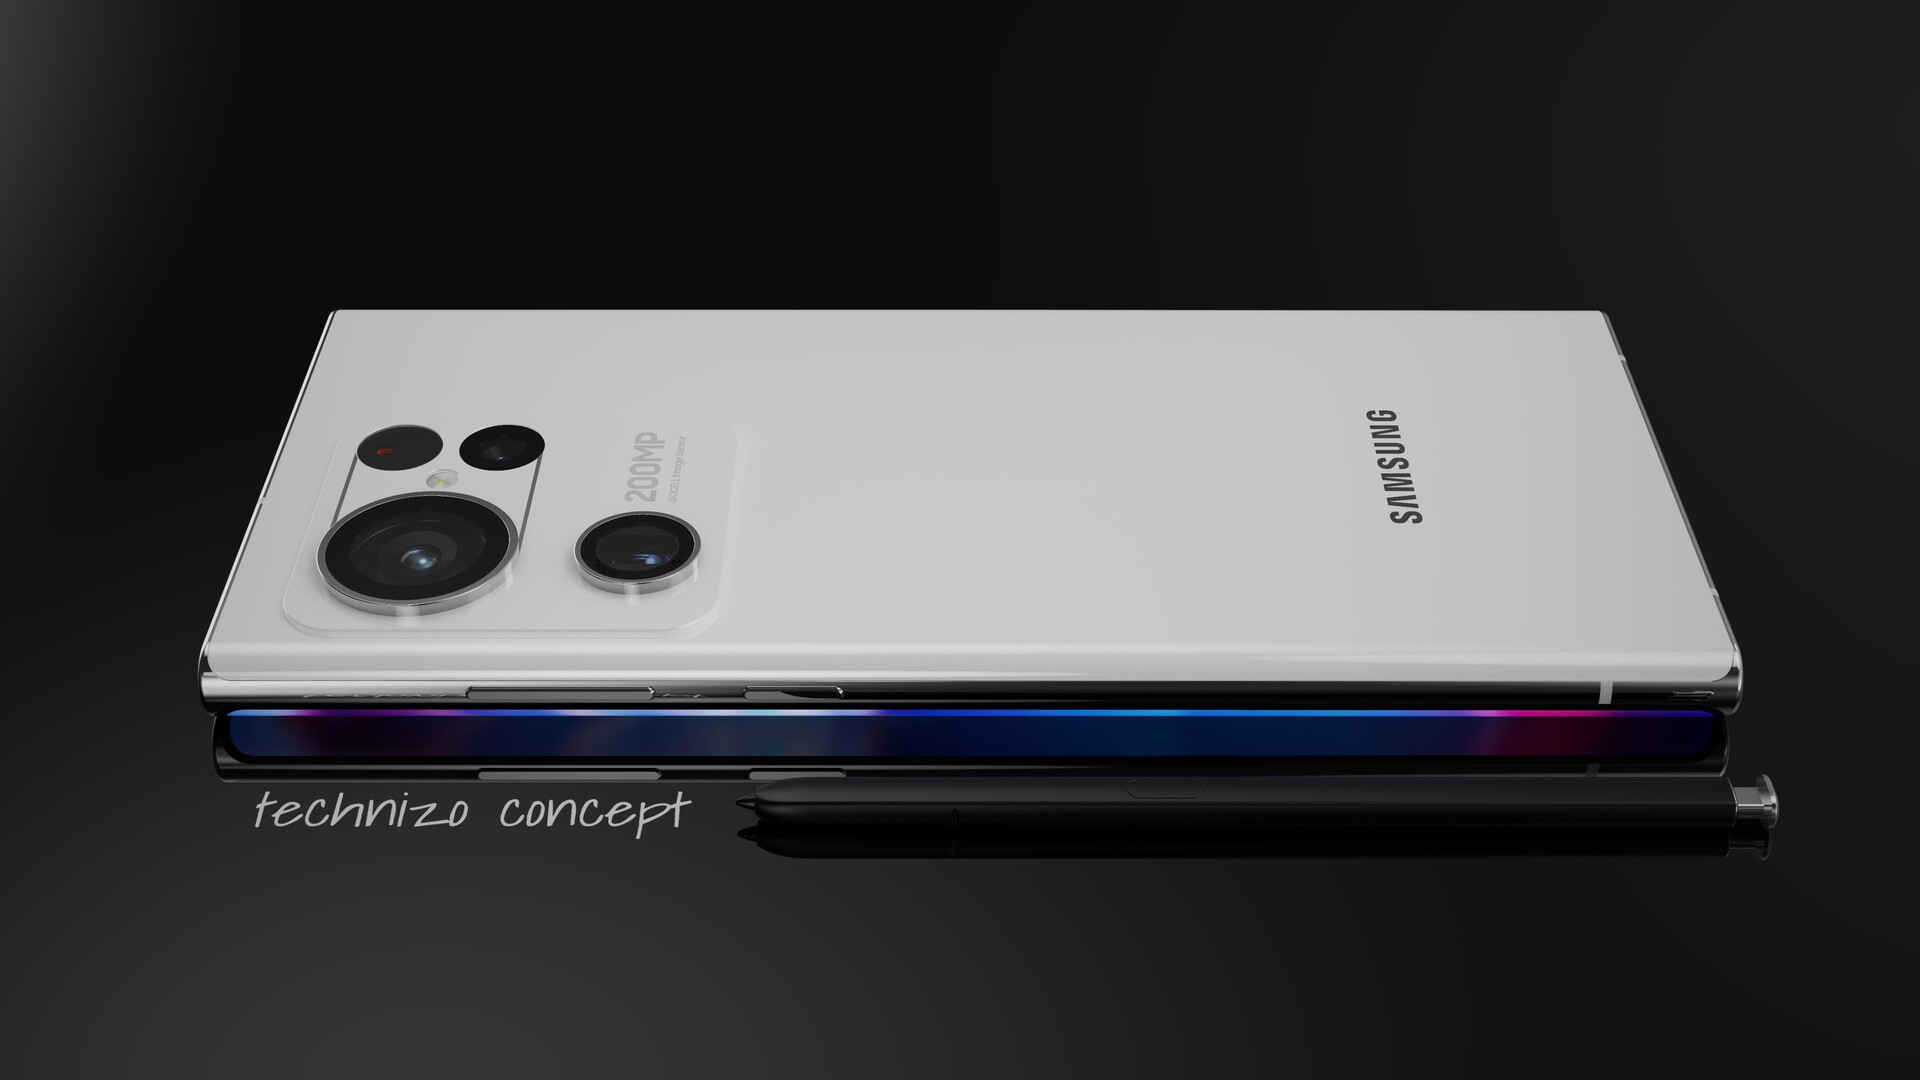 Samsung Galaxy S23 Ultra gets imagined in stunning but potentially